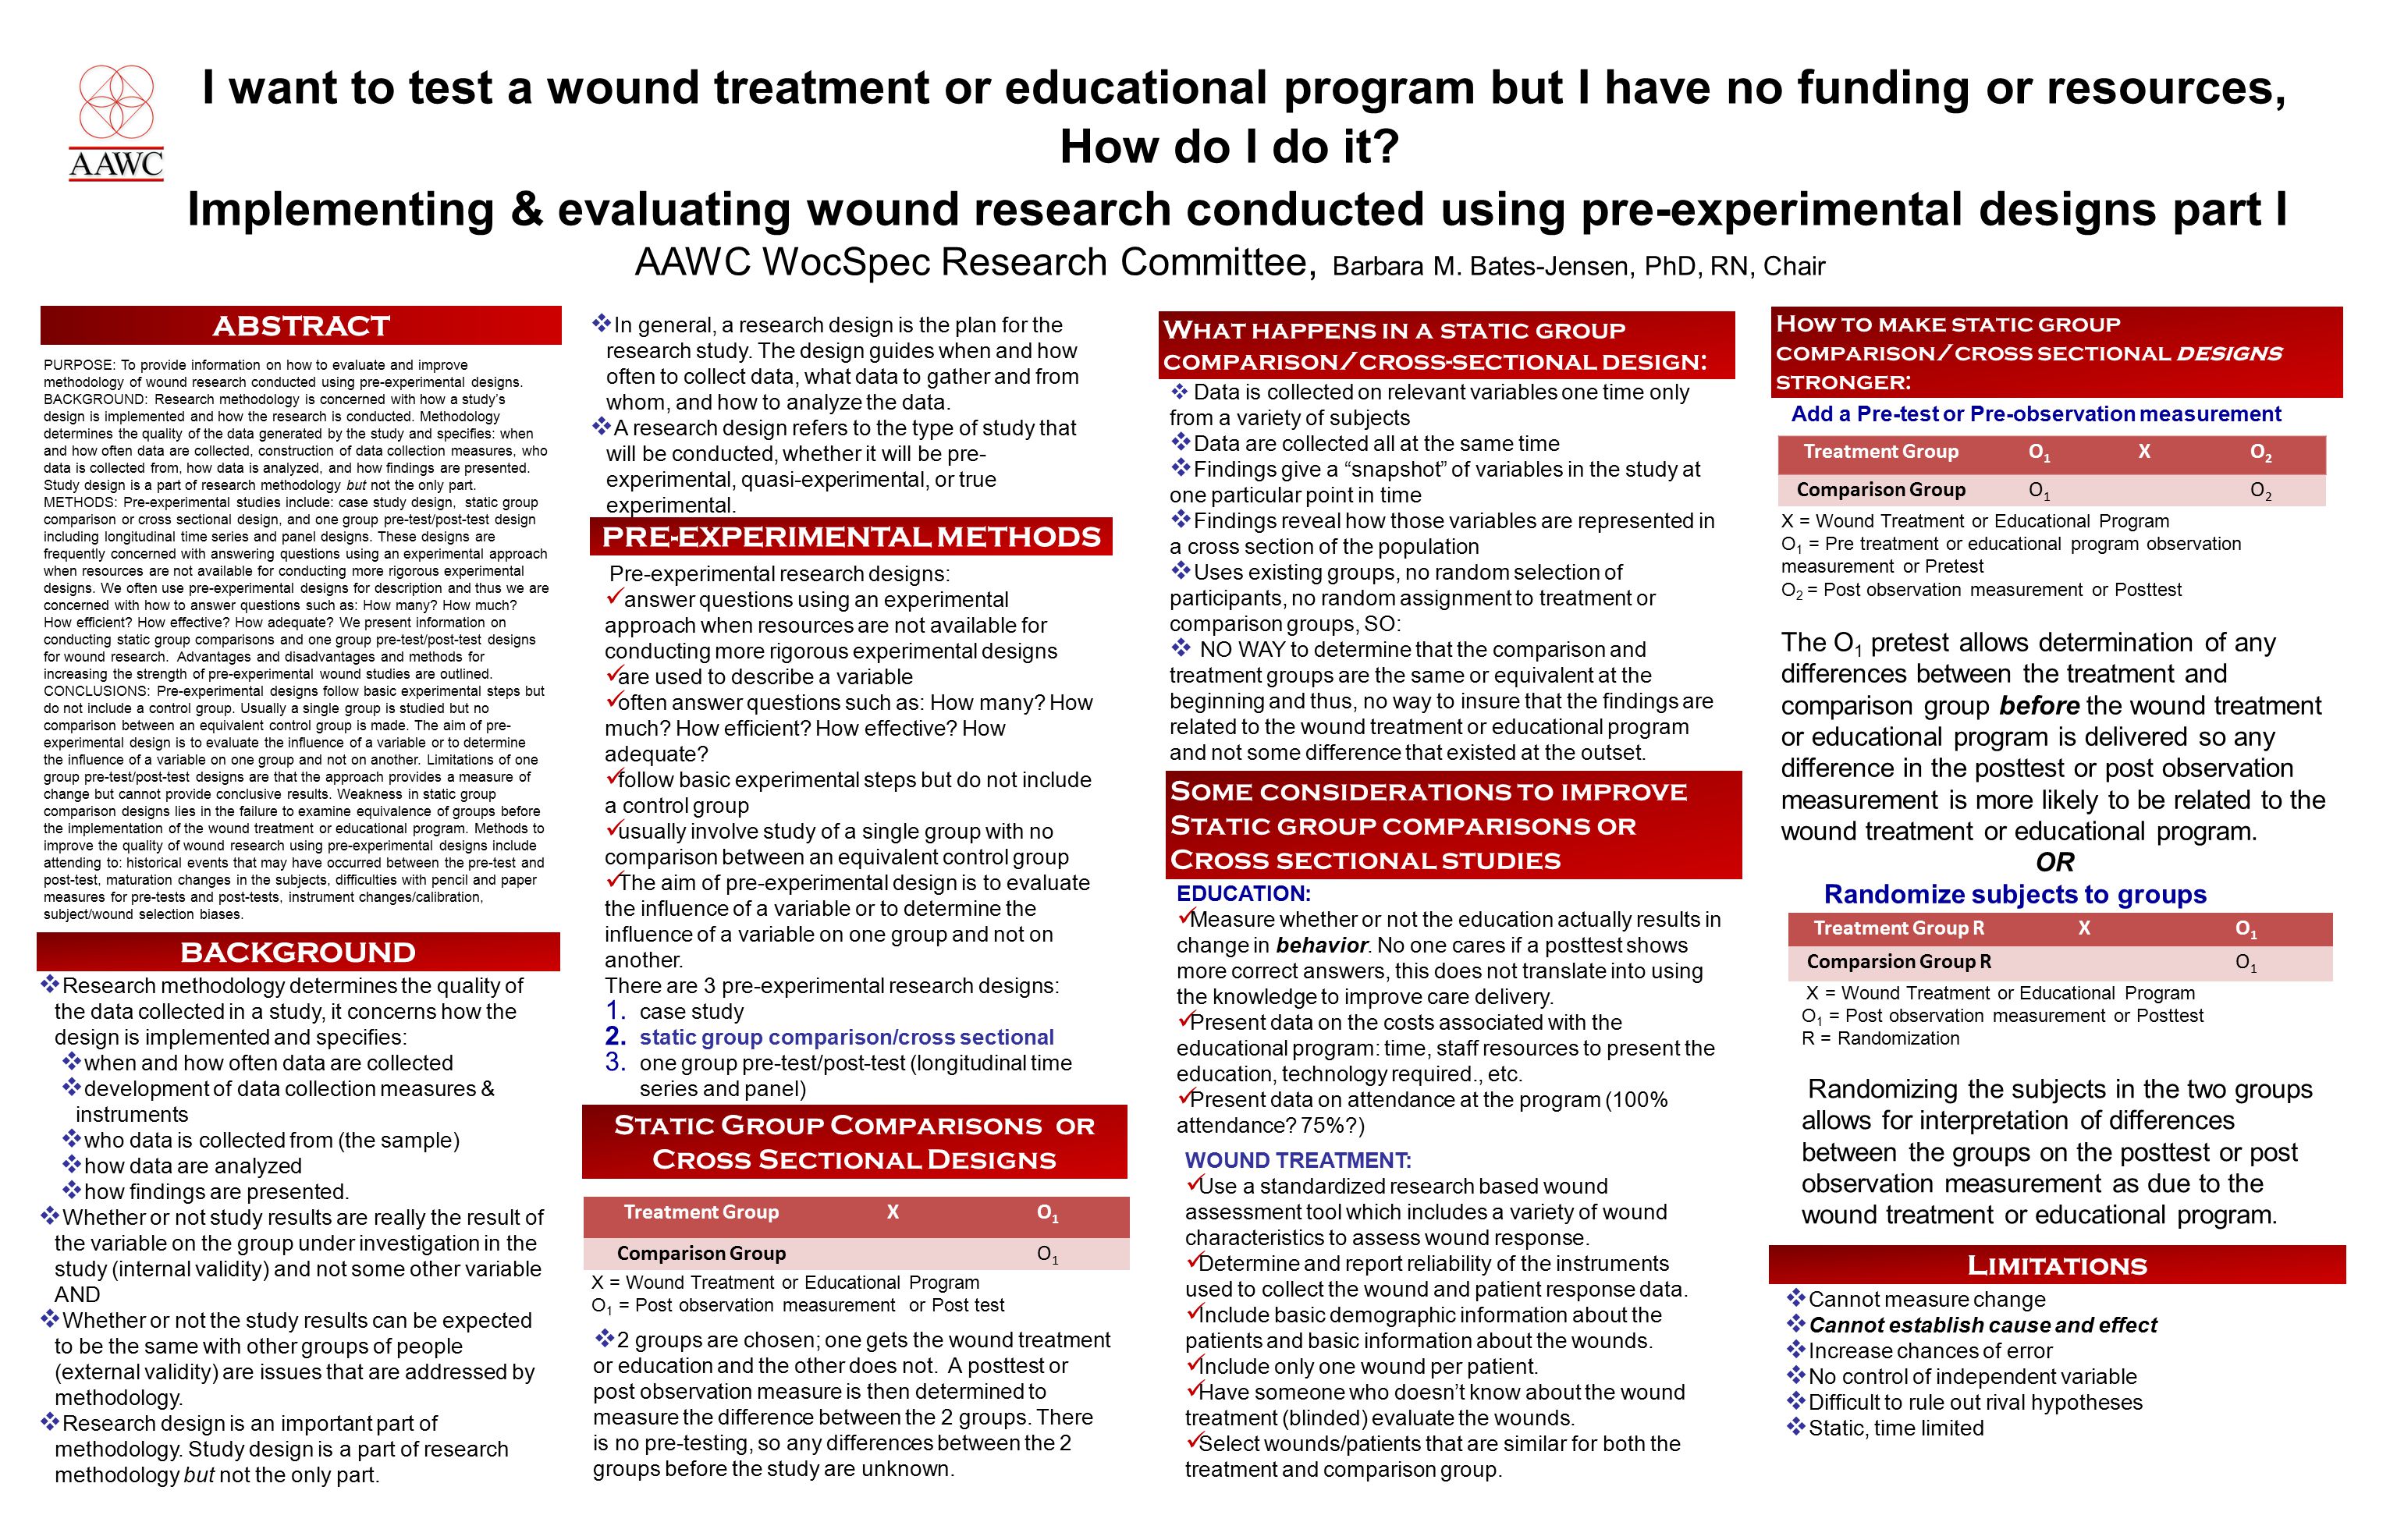 I want to test a wound treatment or educational program but I have no funding or resources, How do I do it.